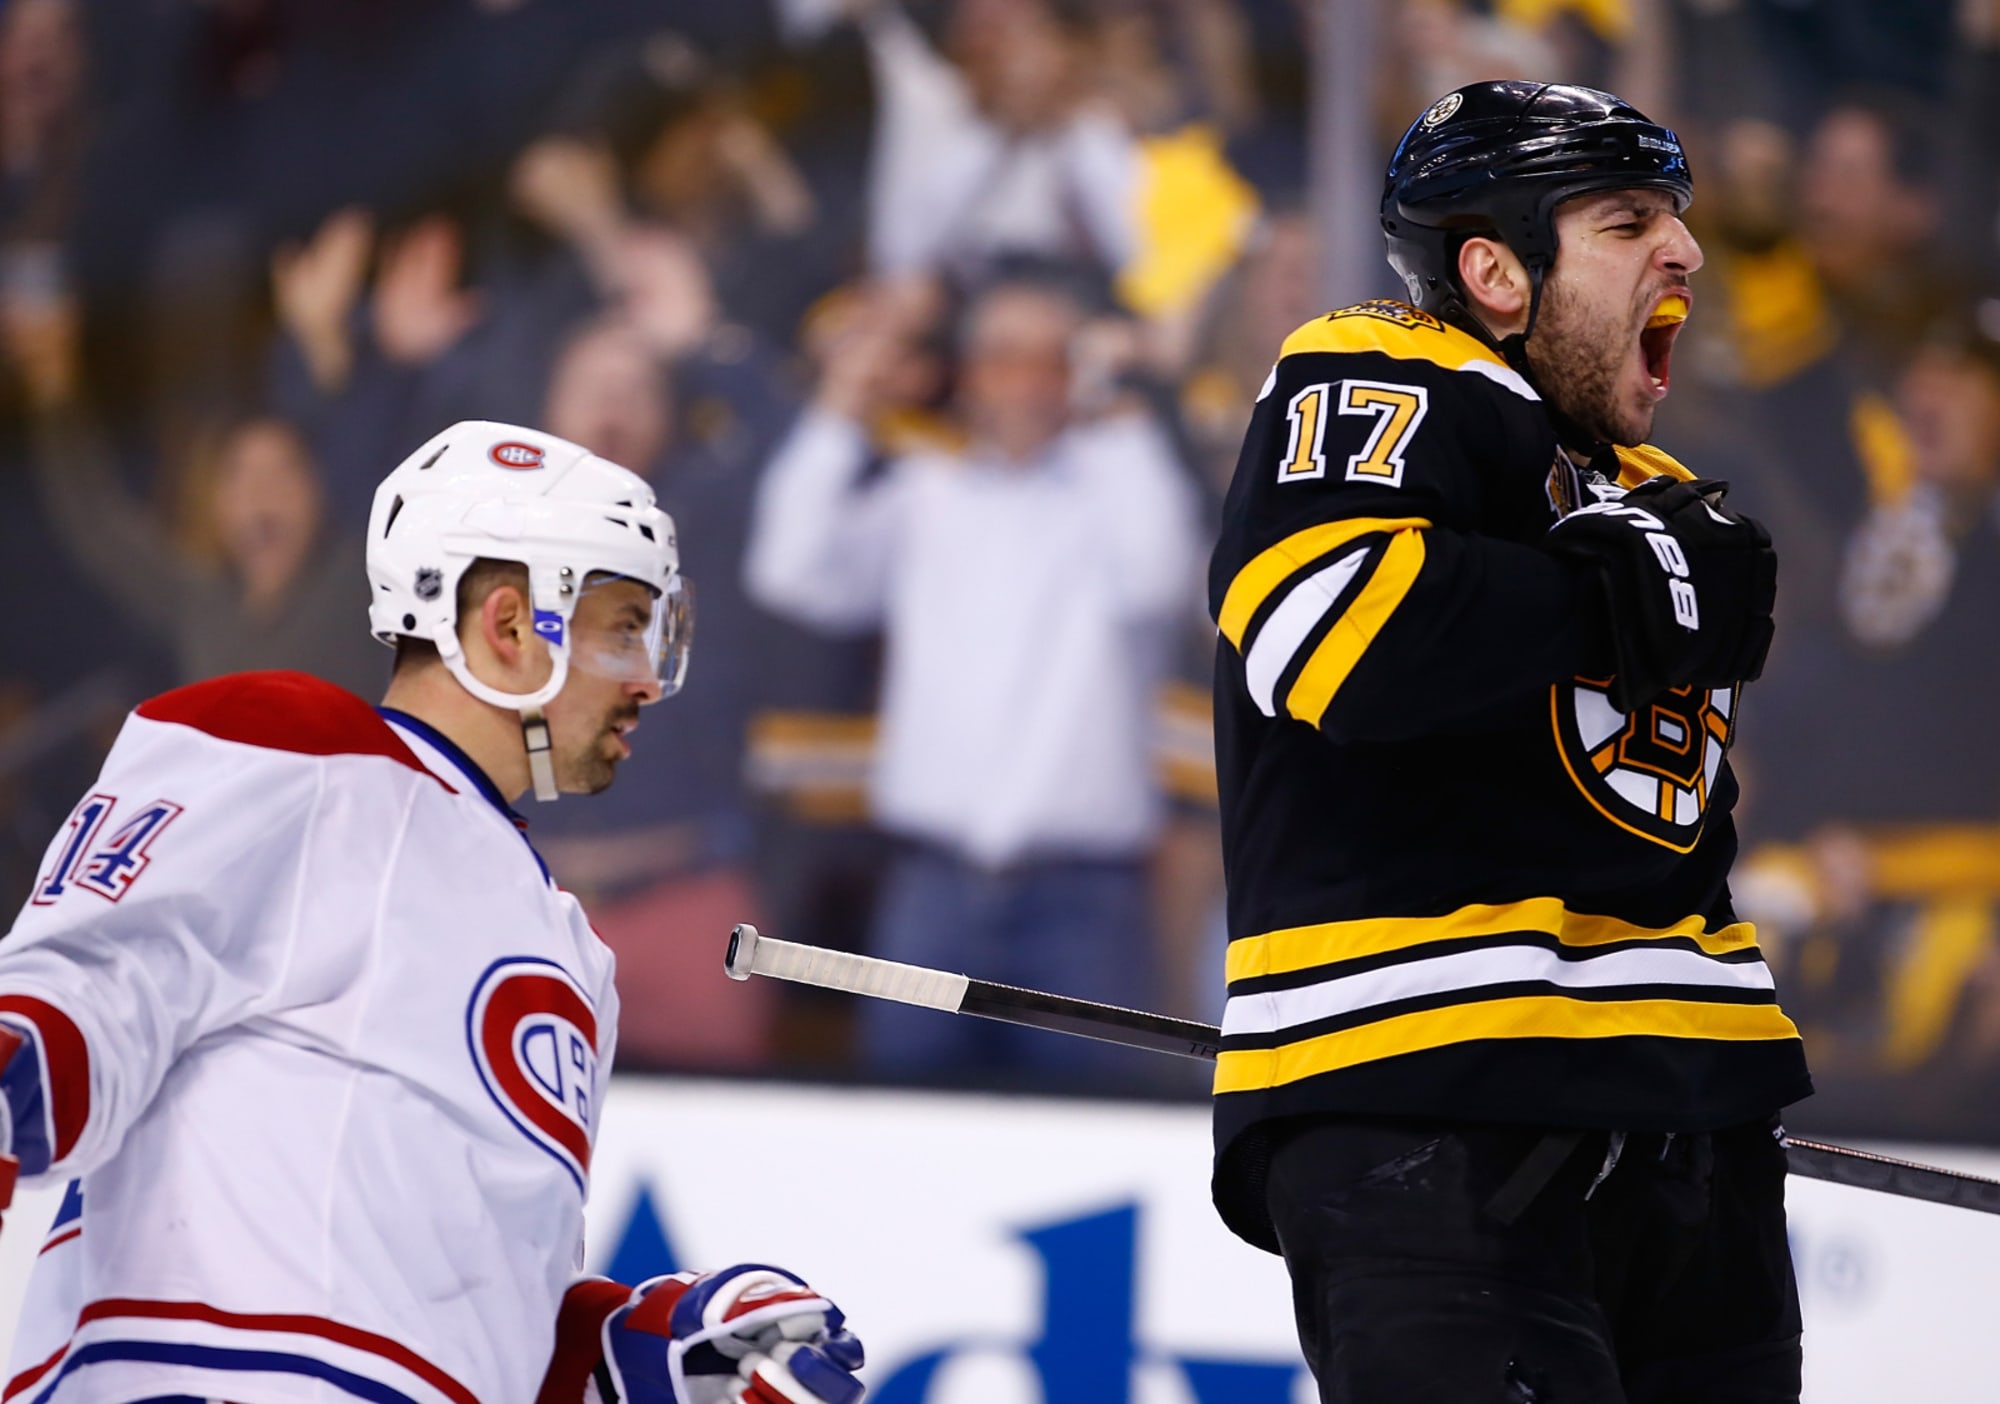 Stanley Cup champion Milan Lucic returning to Boston Bruins